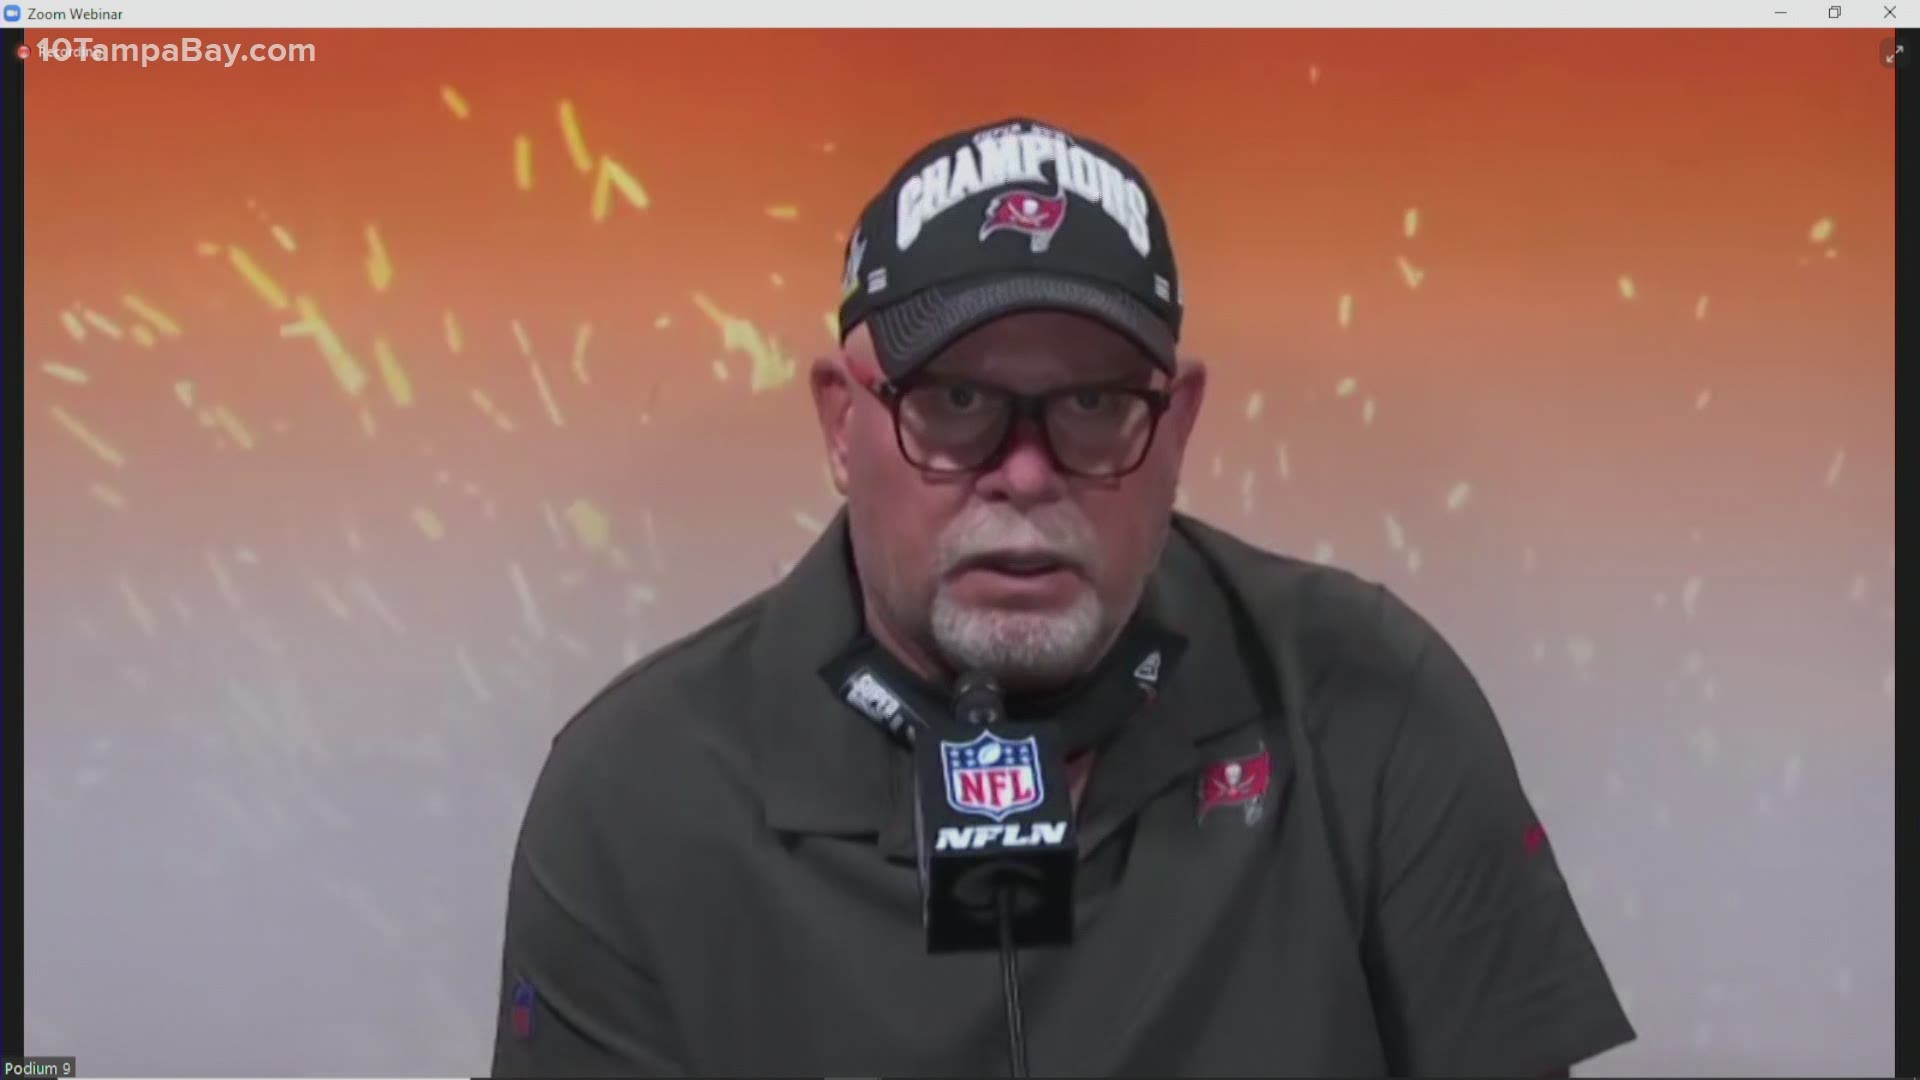 Tampa Bay Buccaneers head coach Bruce Arians speaks during a news conference after the Bucs' 31-9 victory over the Chiefs.